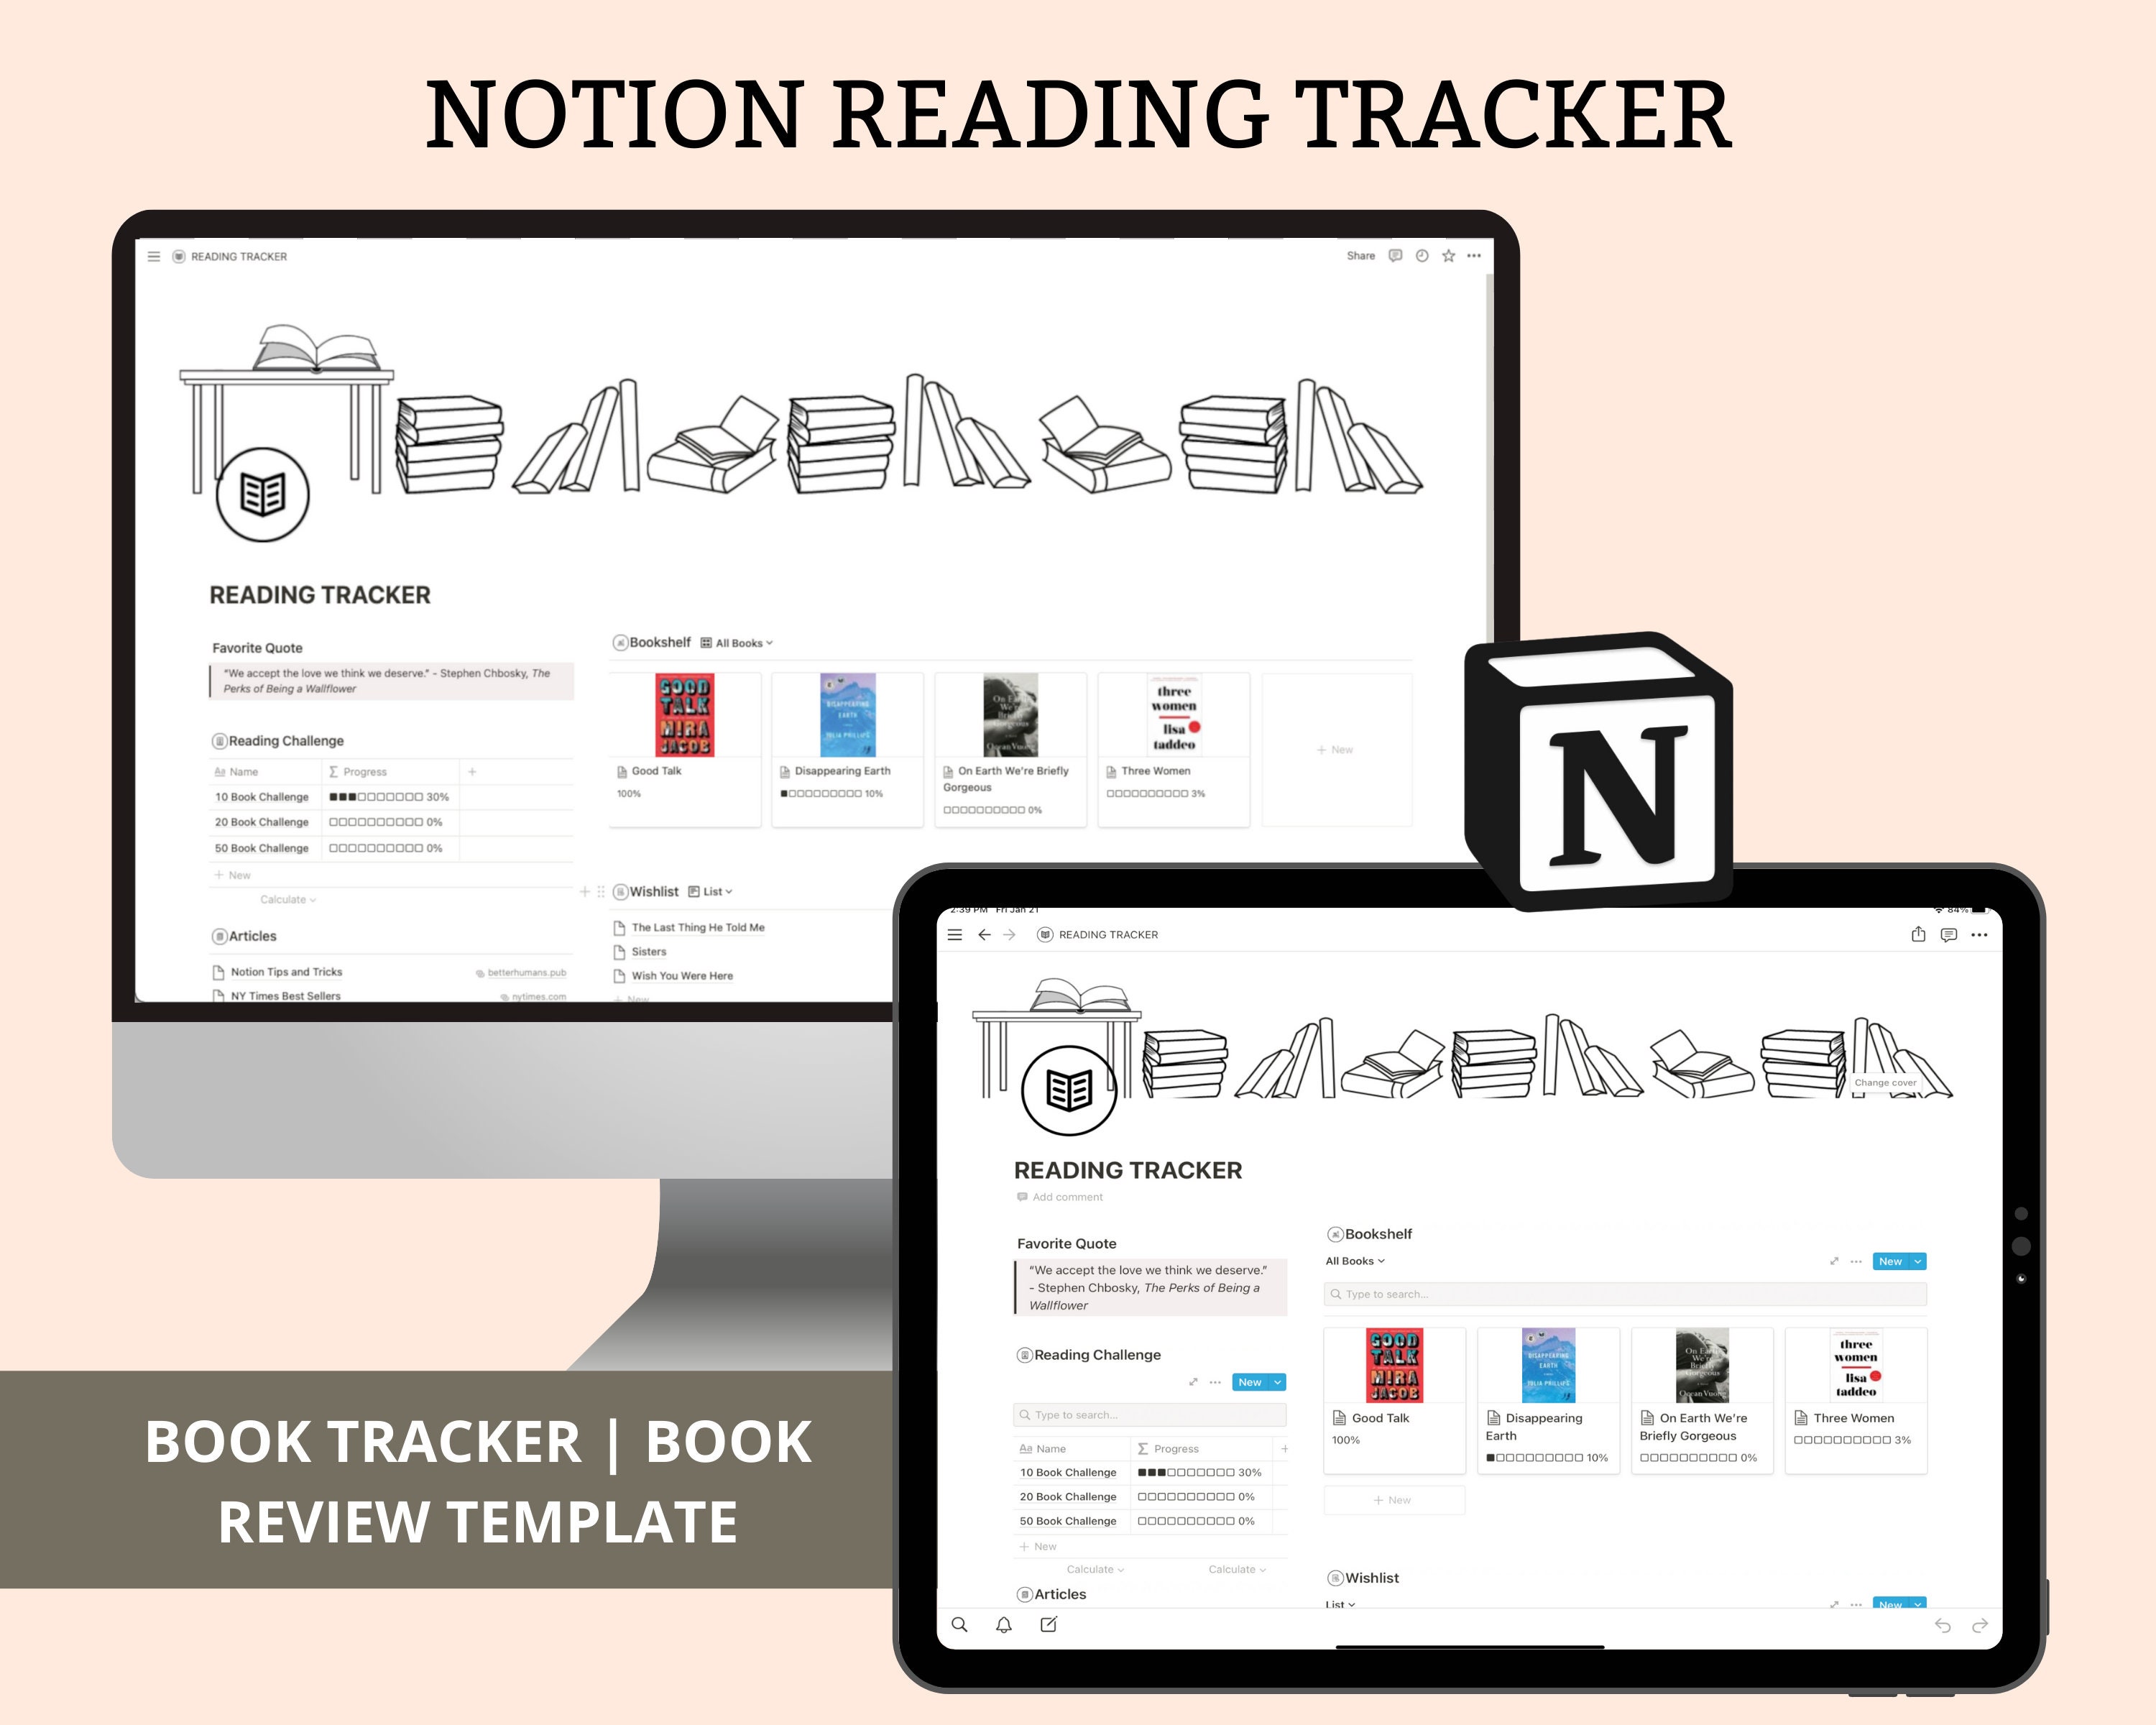 How to Keep a Digital Travel Journal (+ Free Notion Template